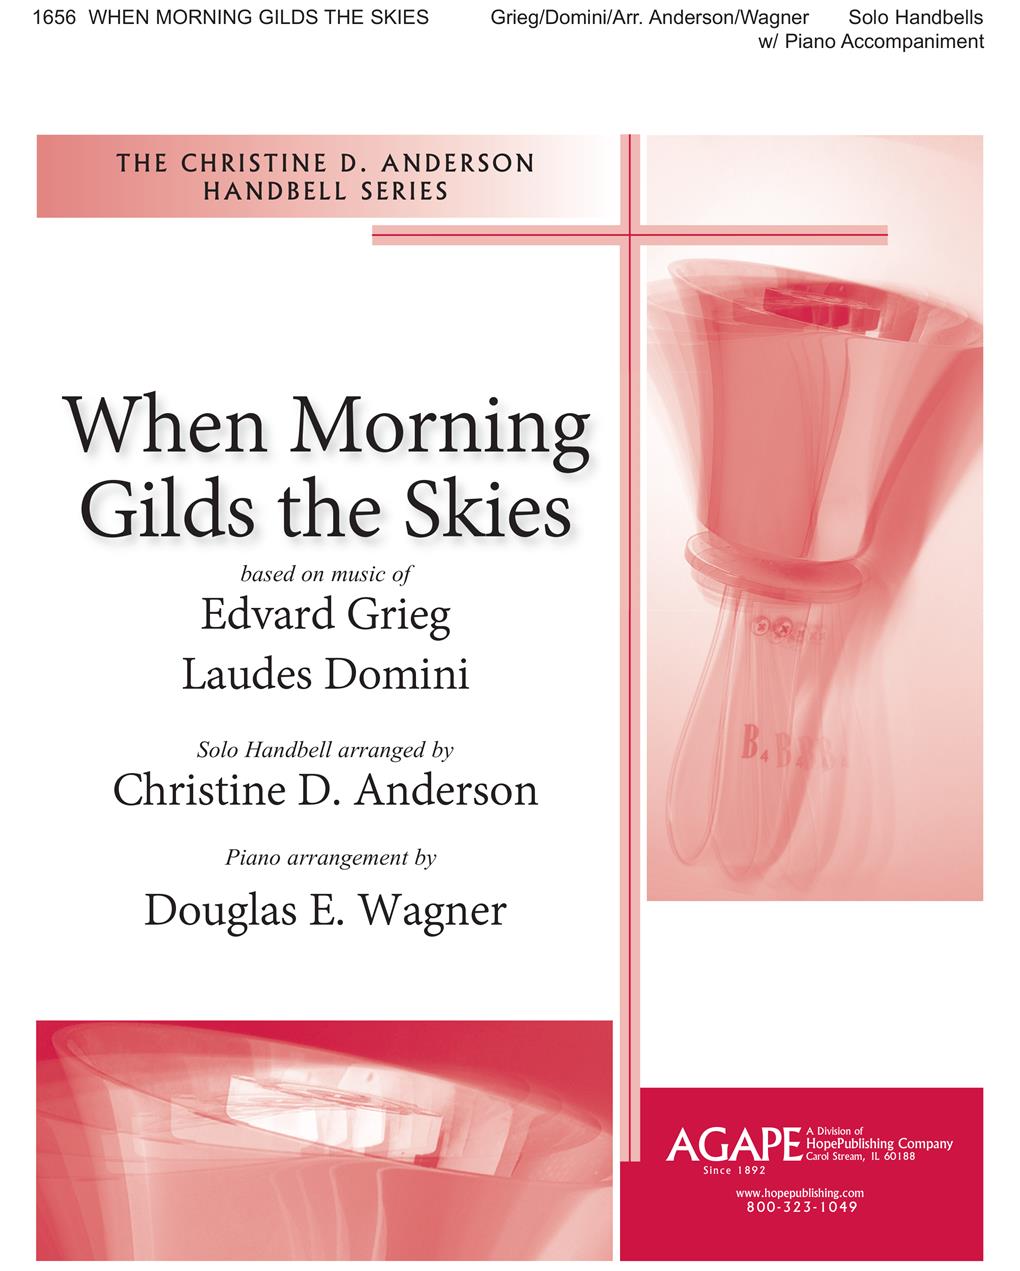 When Morning Gilds the Skies - Solo Handbell Cover Image